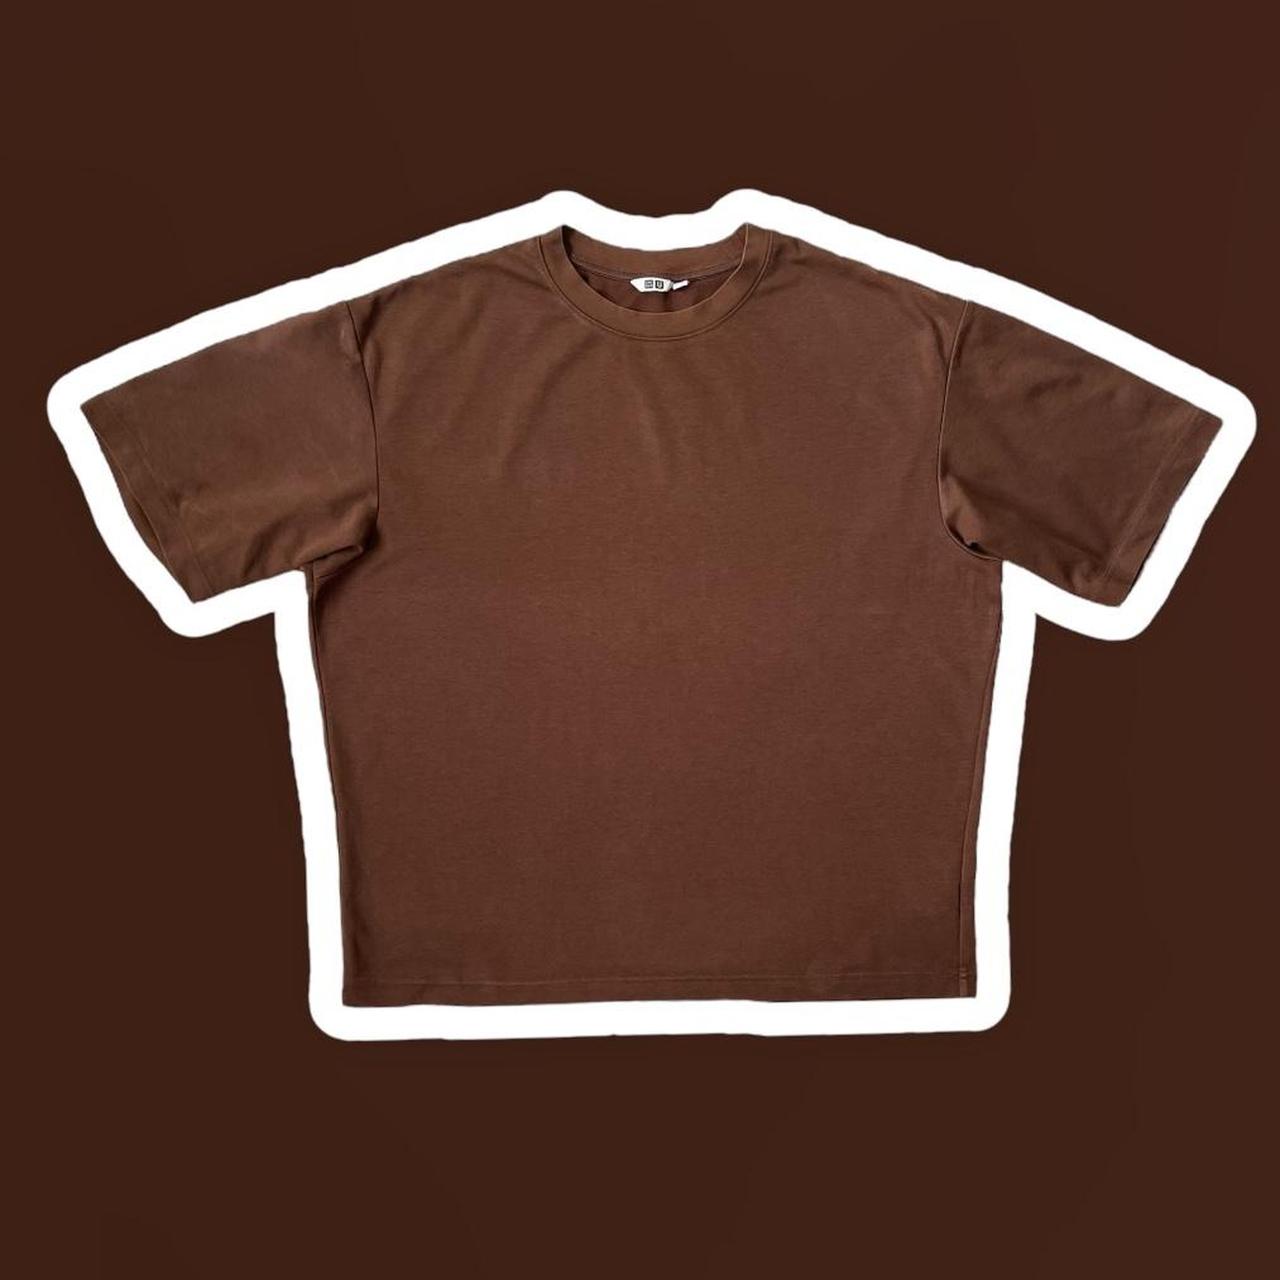 Uniqlo Baggy Brown Oversized Top ️ ️Size:... - Depop